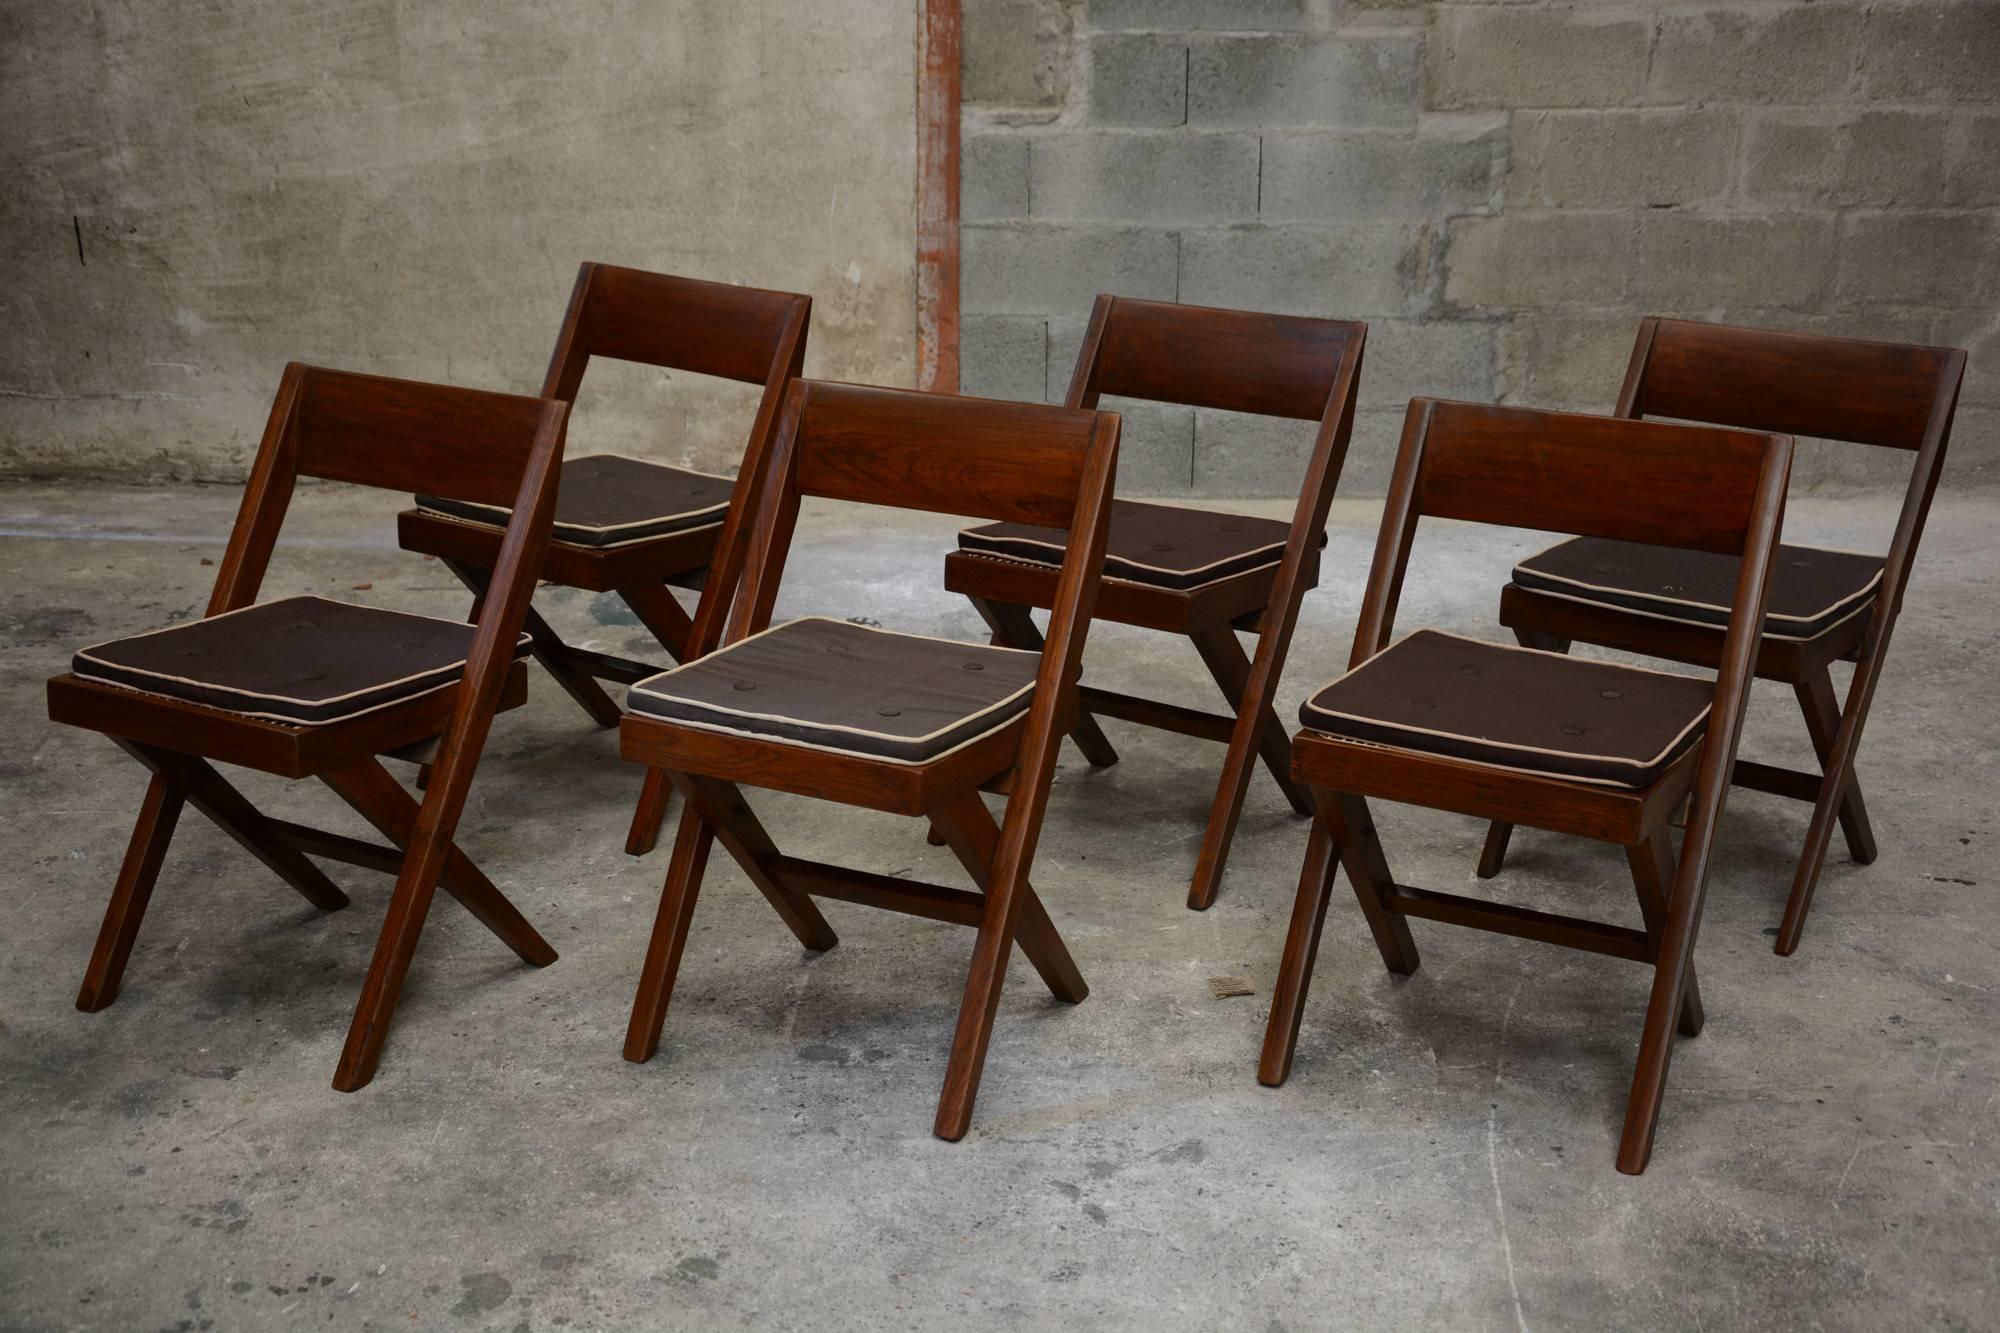 Pierre Jeanneret, unique set of six library chairs for the Court Building and the University Library in Chandigarh, India. Teak, woven cane. Two chairs are with original lettering (see photos). These chairs were handmade, dimensions can vary